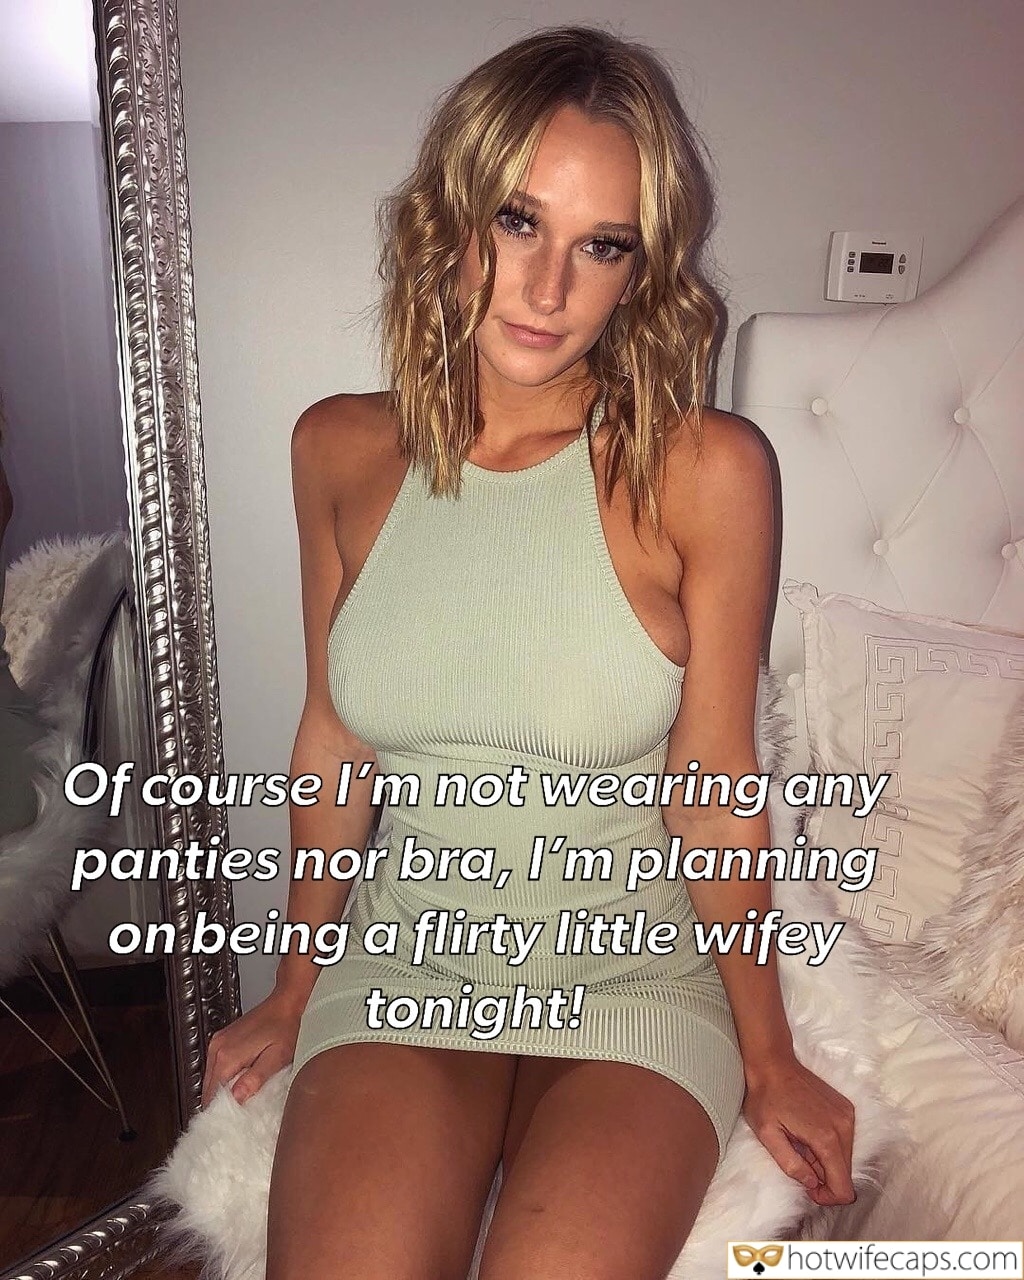 Wife Sharing Sexy Memes No Panties Cheating Bottomless hotwife caption: Of course I’m not wearing any panties nor bra, I’m planning on being a flirty little wifey tonight! Sexy Blonde in White